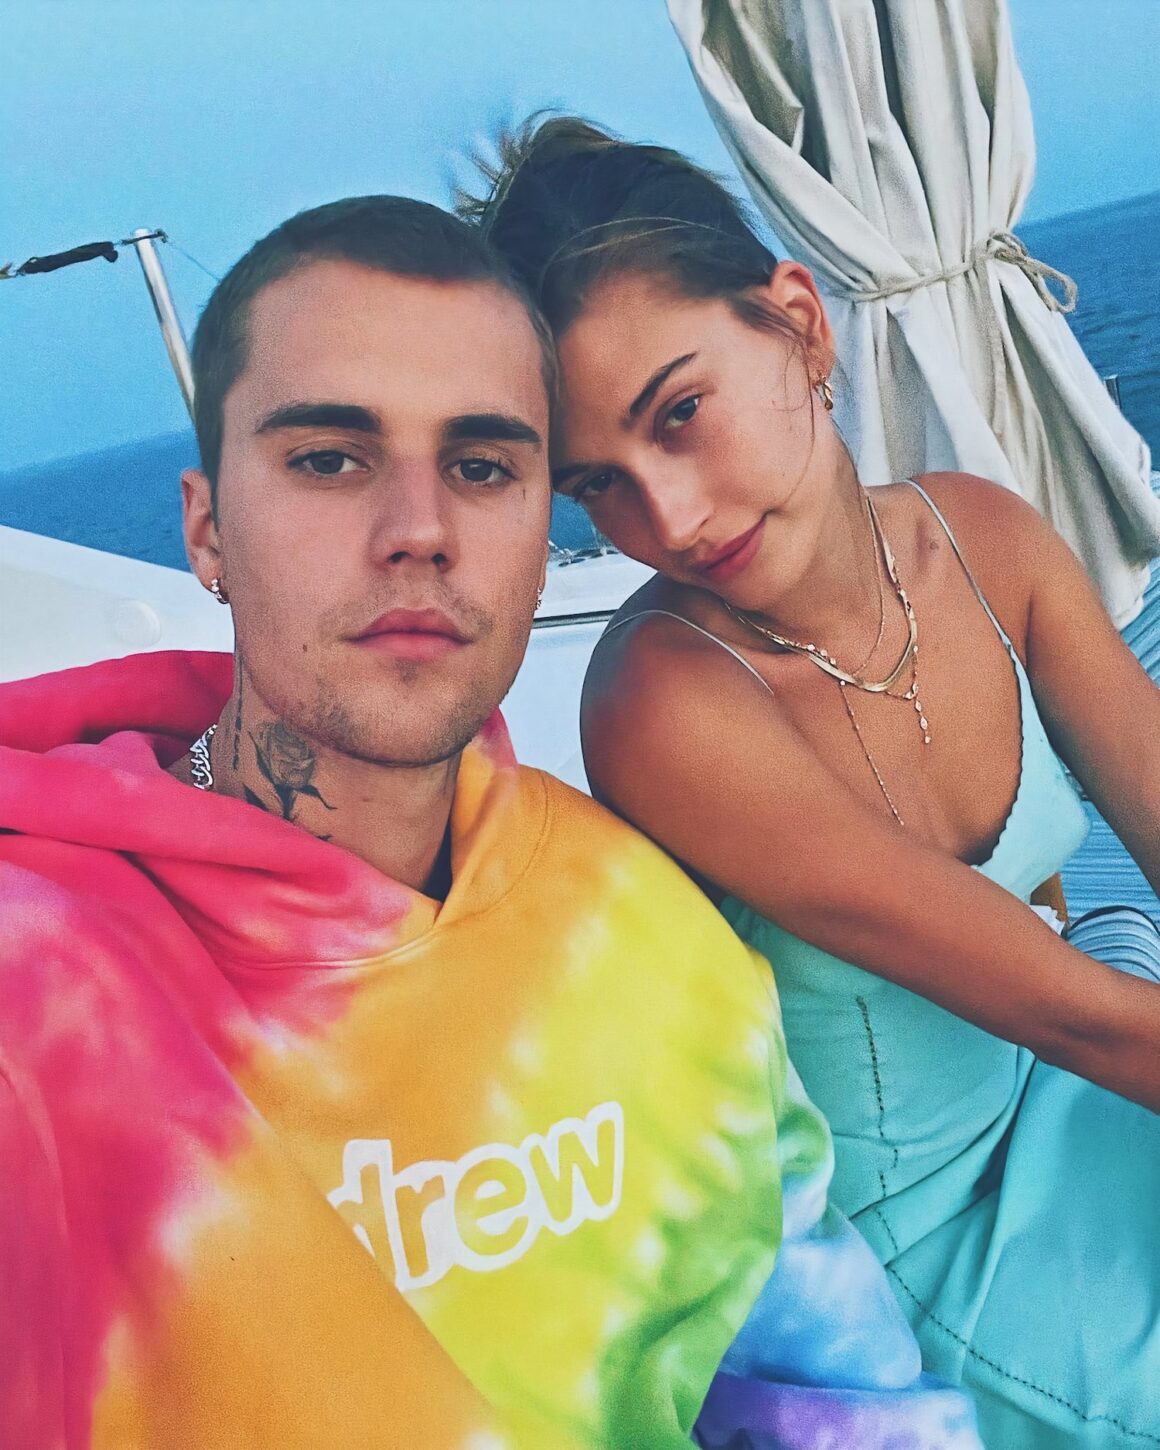 Hailey Bieber Responds to Claim There's "Trouble in Paradise" With Justin Bieber